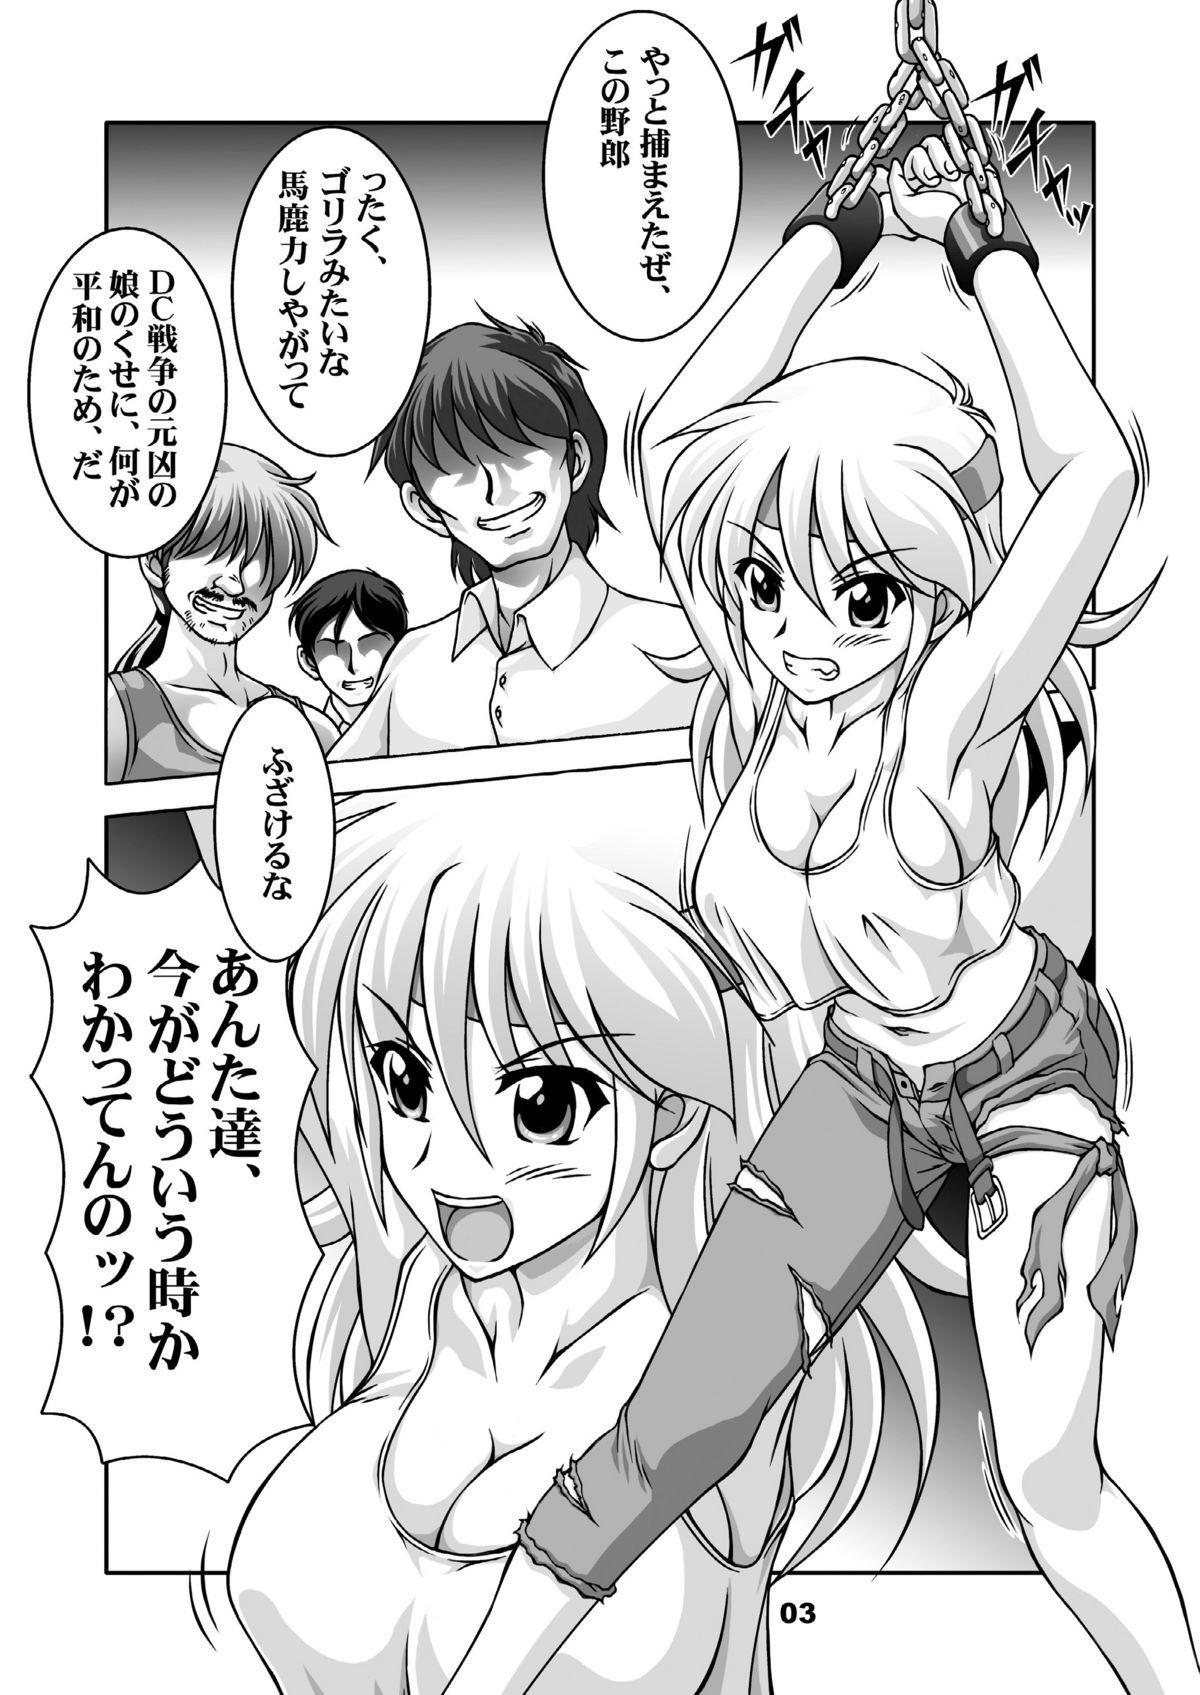 Jerking Off BACK・ALLEY RYUNE - Super robot wars Panty - Page 3